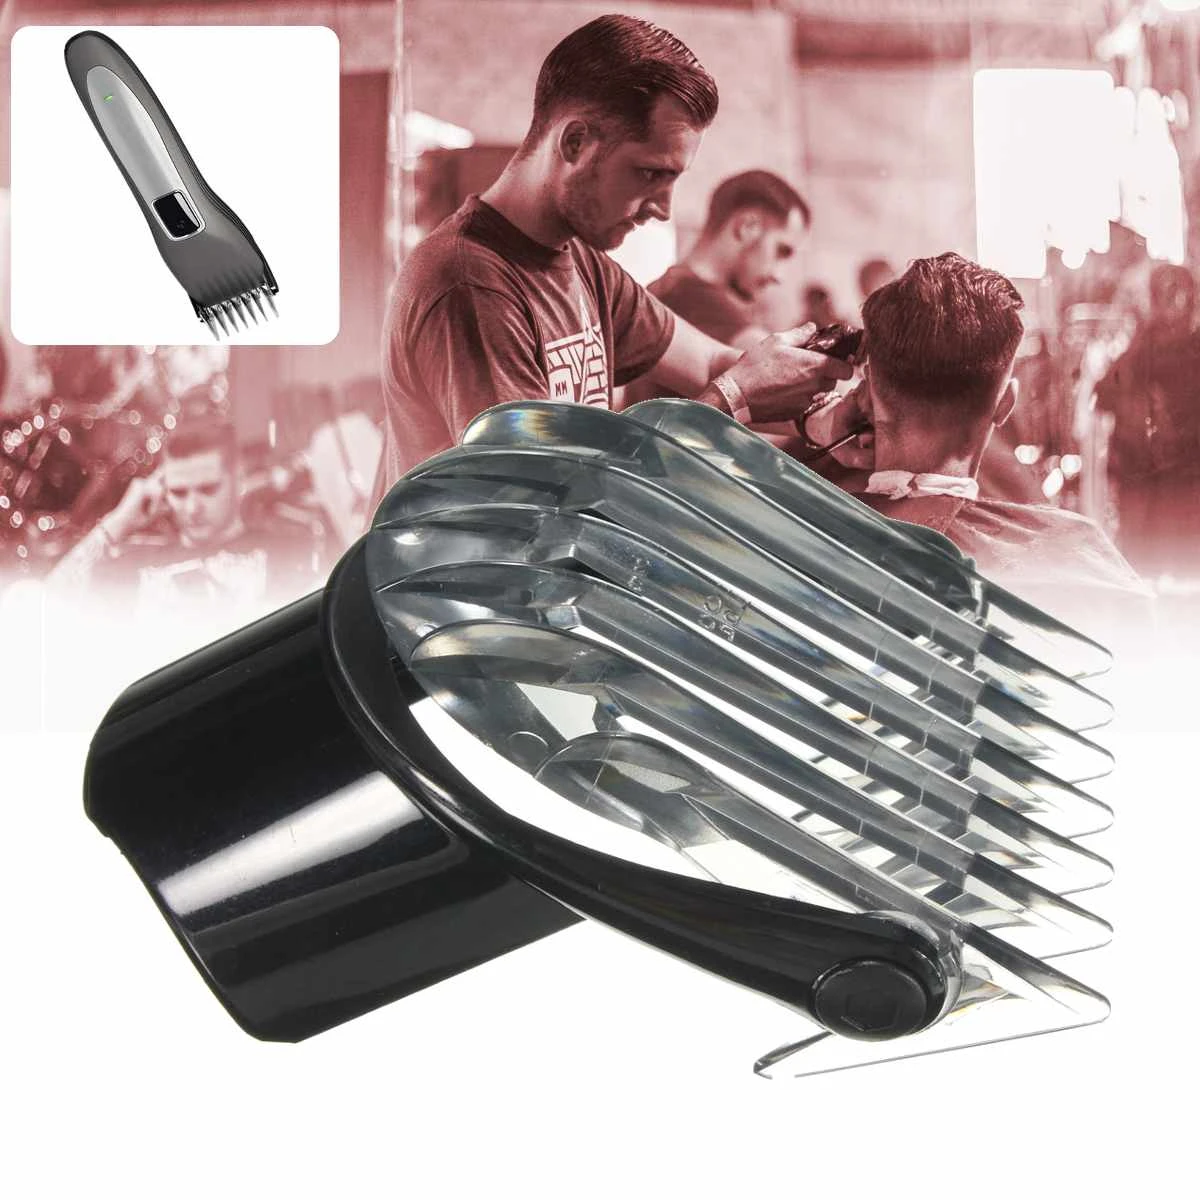 3-21mm Hair Clipper Attachment Grooming Comb for Philips QC5010 QC5050 QC5070 QC5090